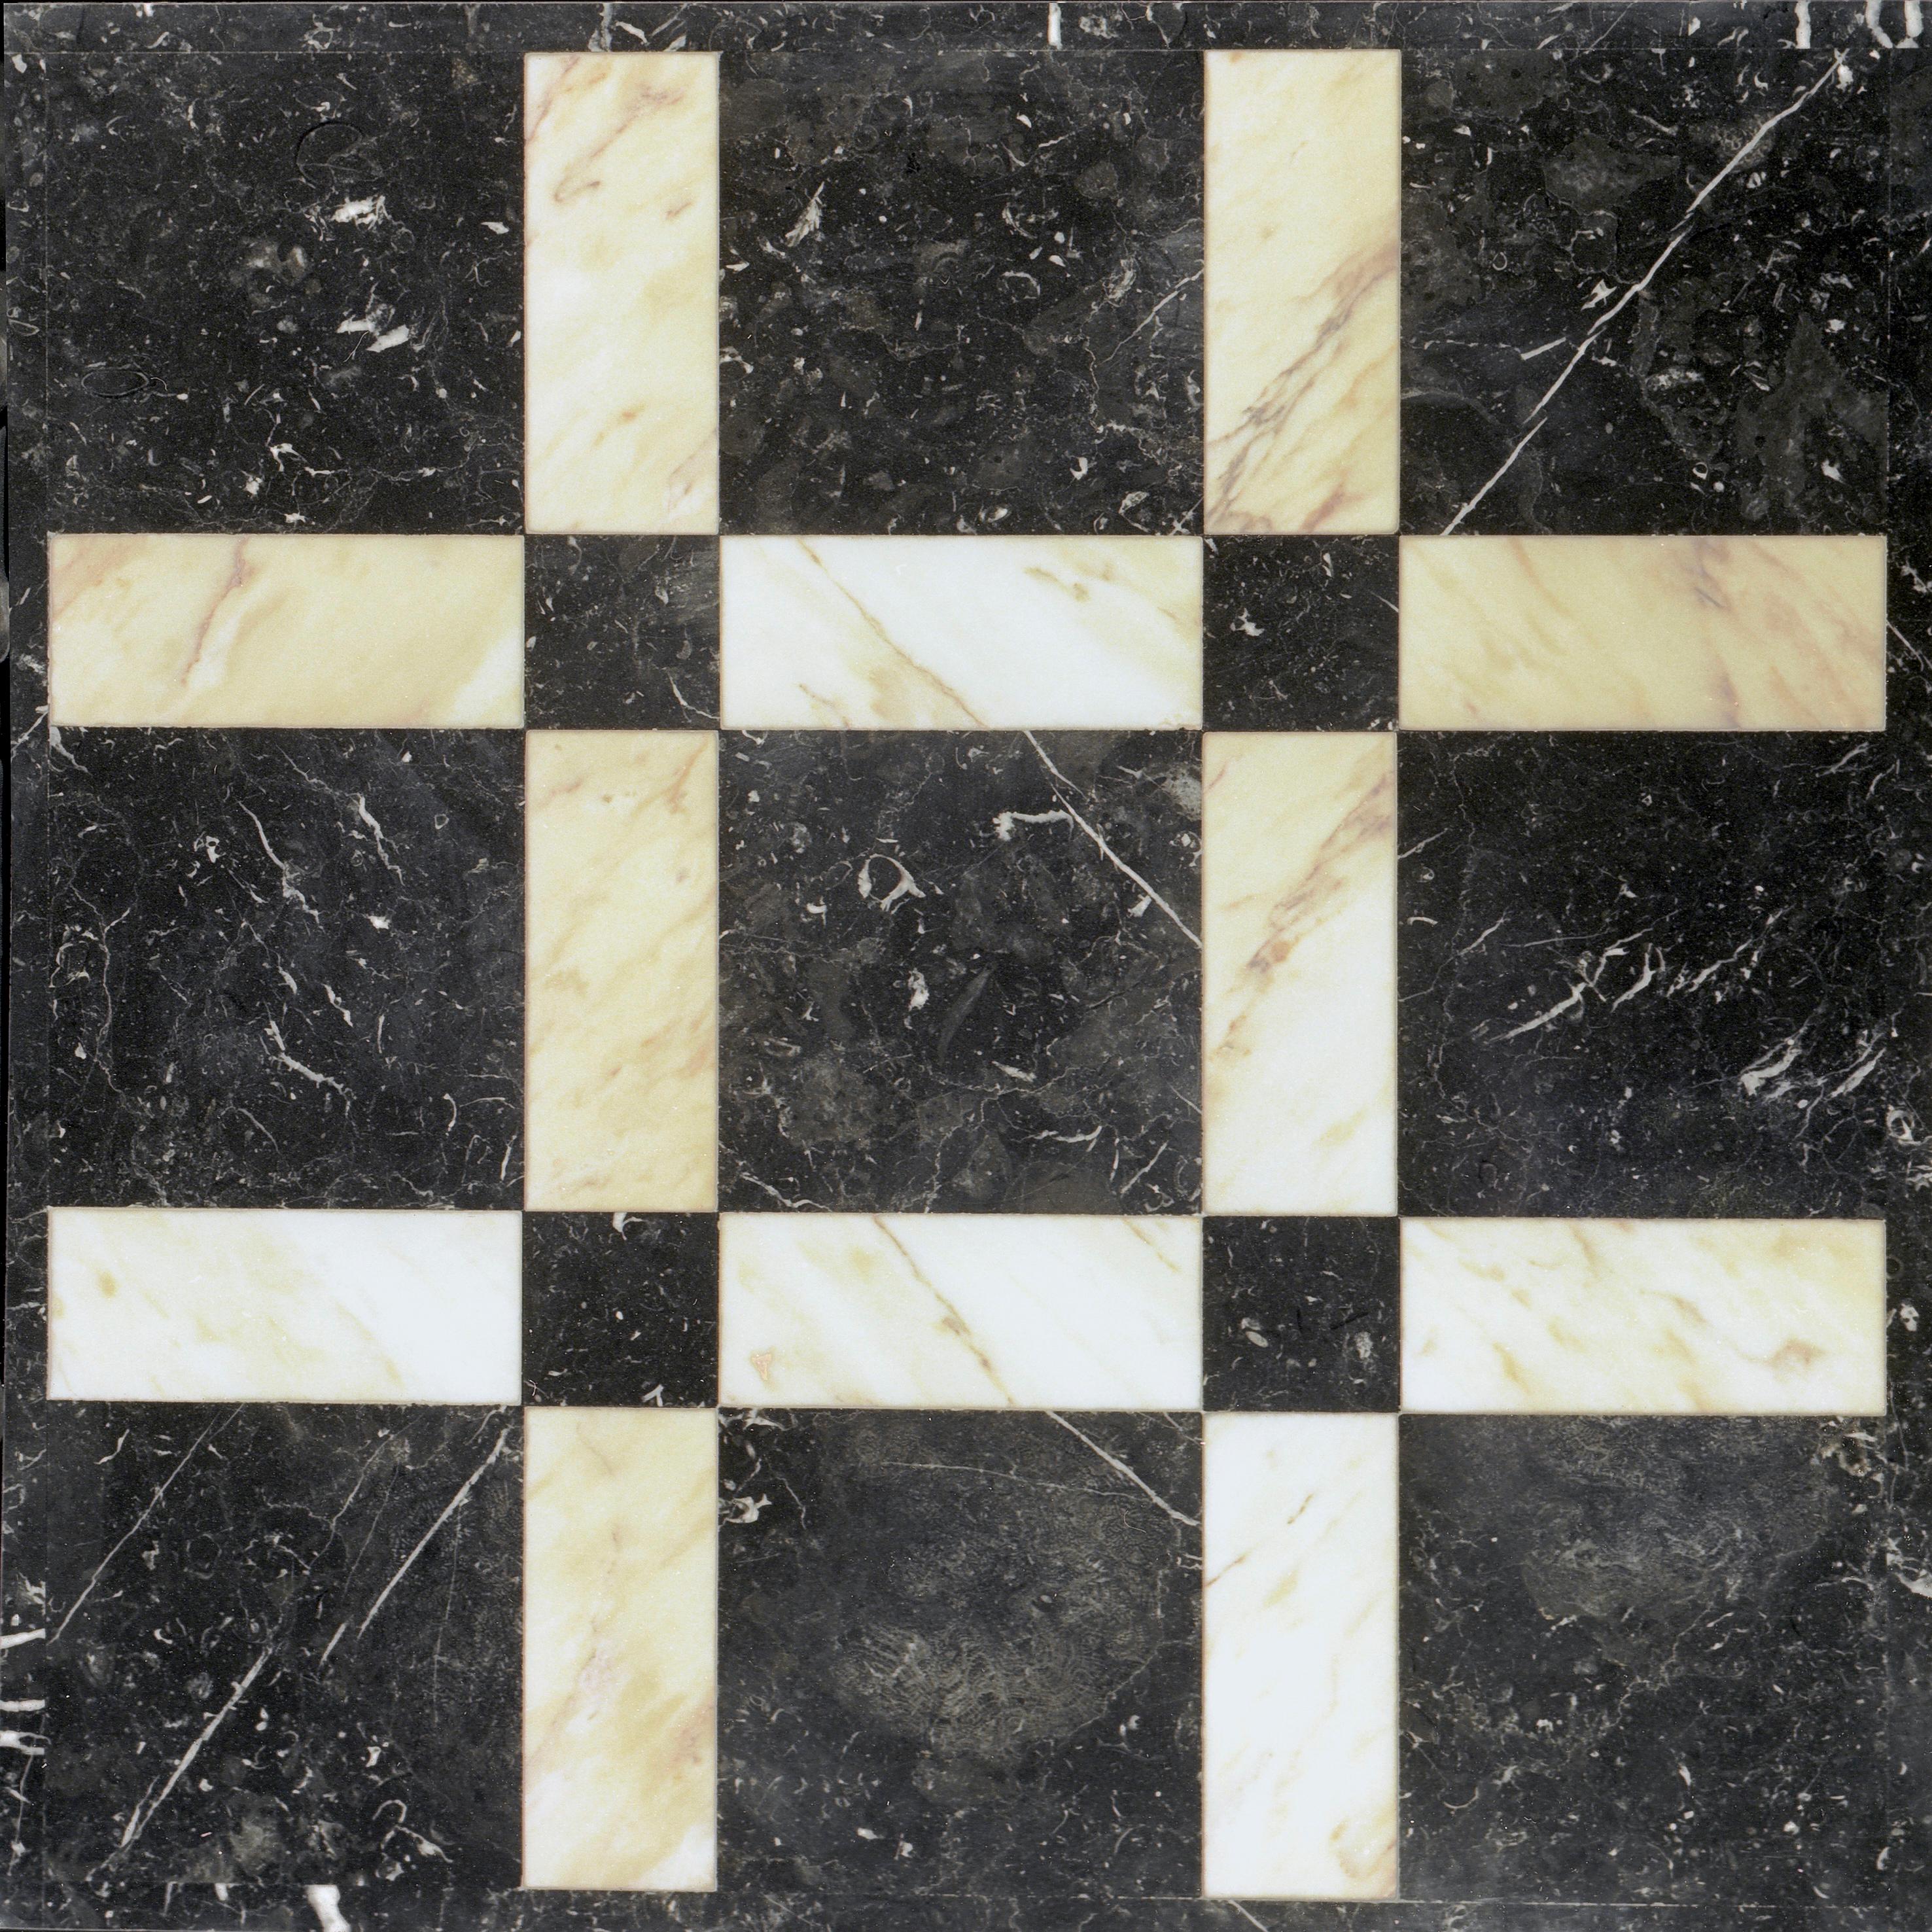 The price is per square meter.
Name: BAB
Materials: Nero Marquina, Rosa Portogallo
Size : Cm 40X40 
Thickness: cm 2
KG/MQ: Kg 54
Finishes: Polished
Designed by: Up & Up.

